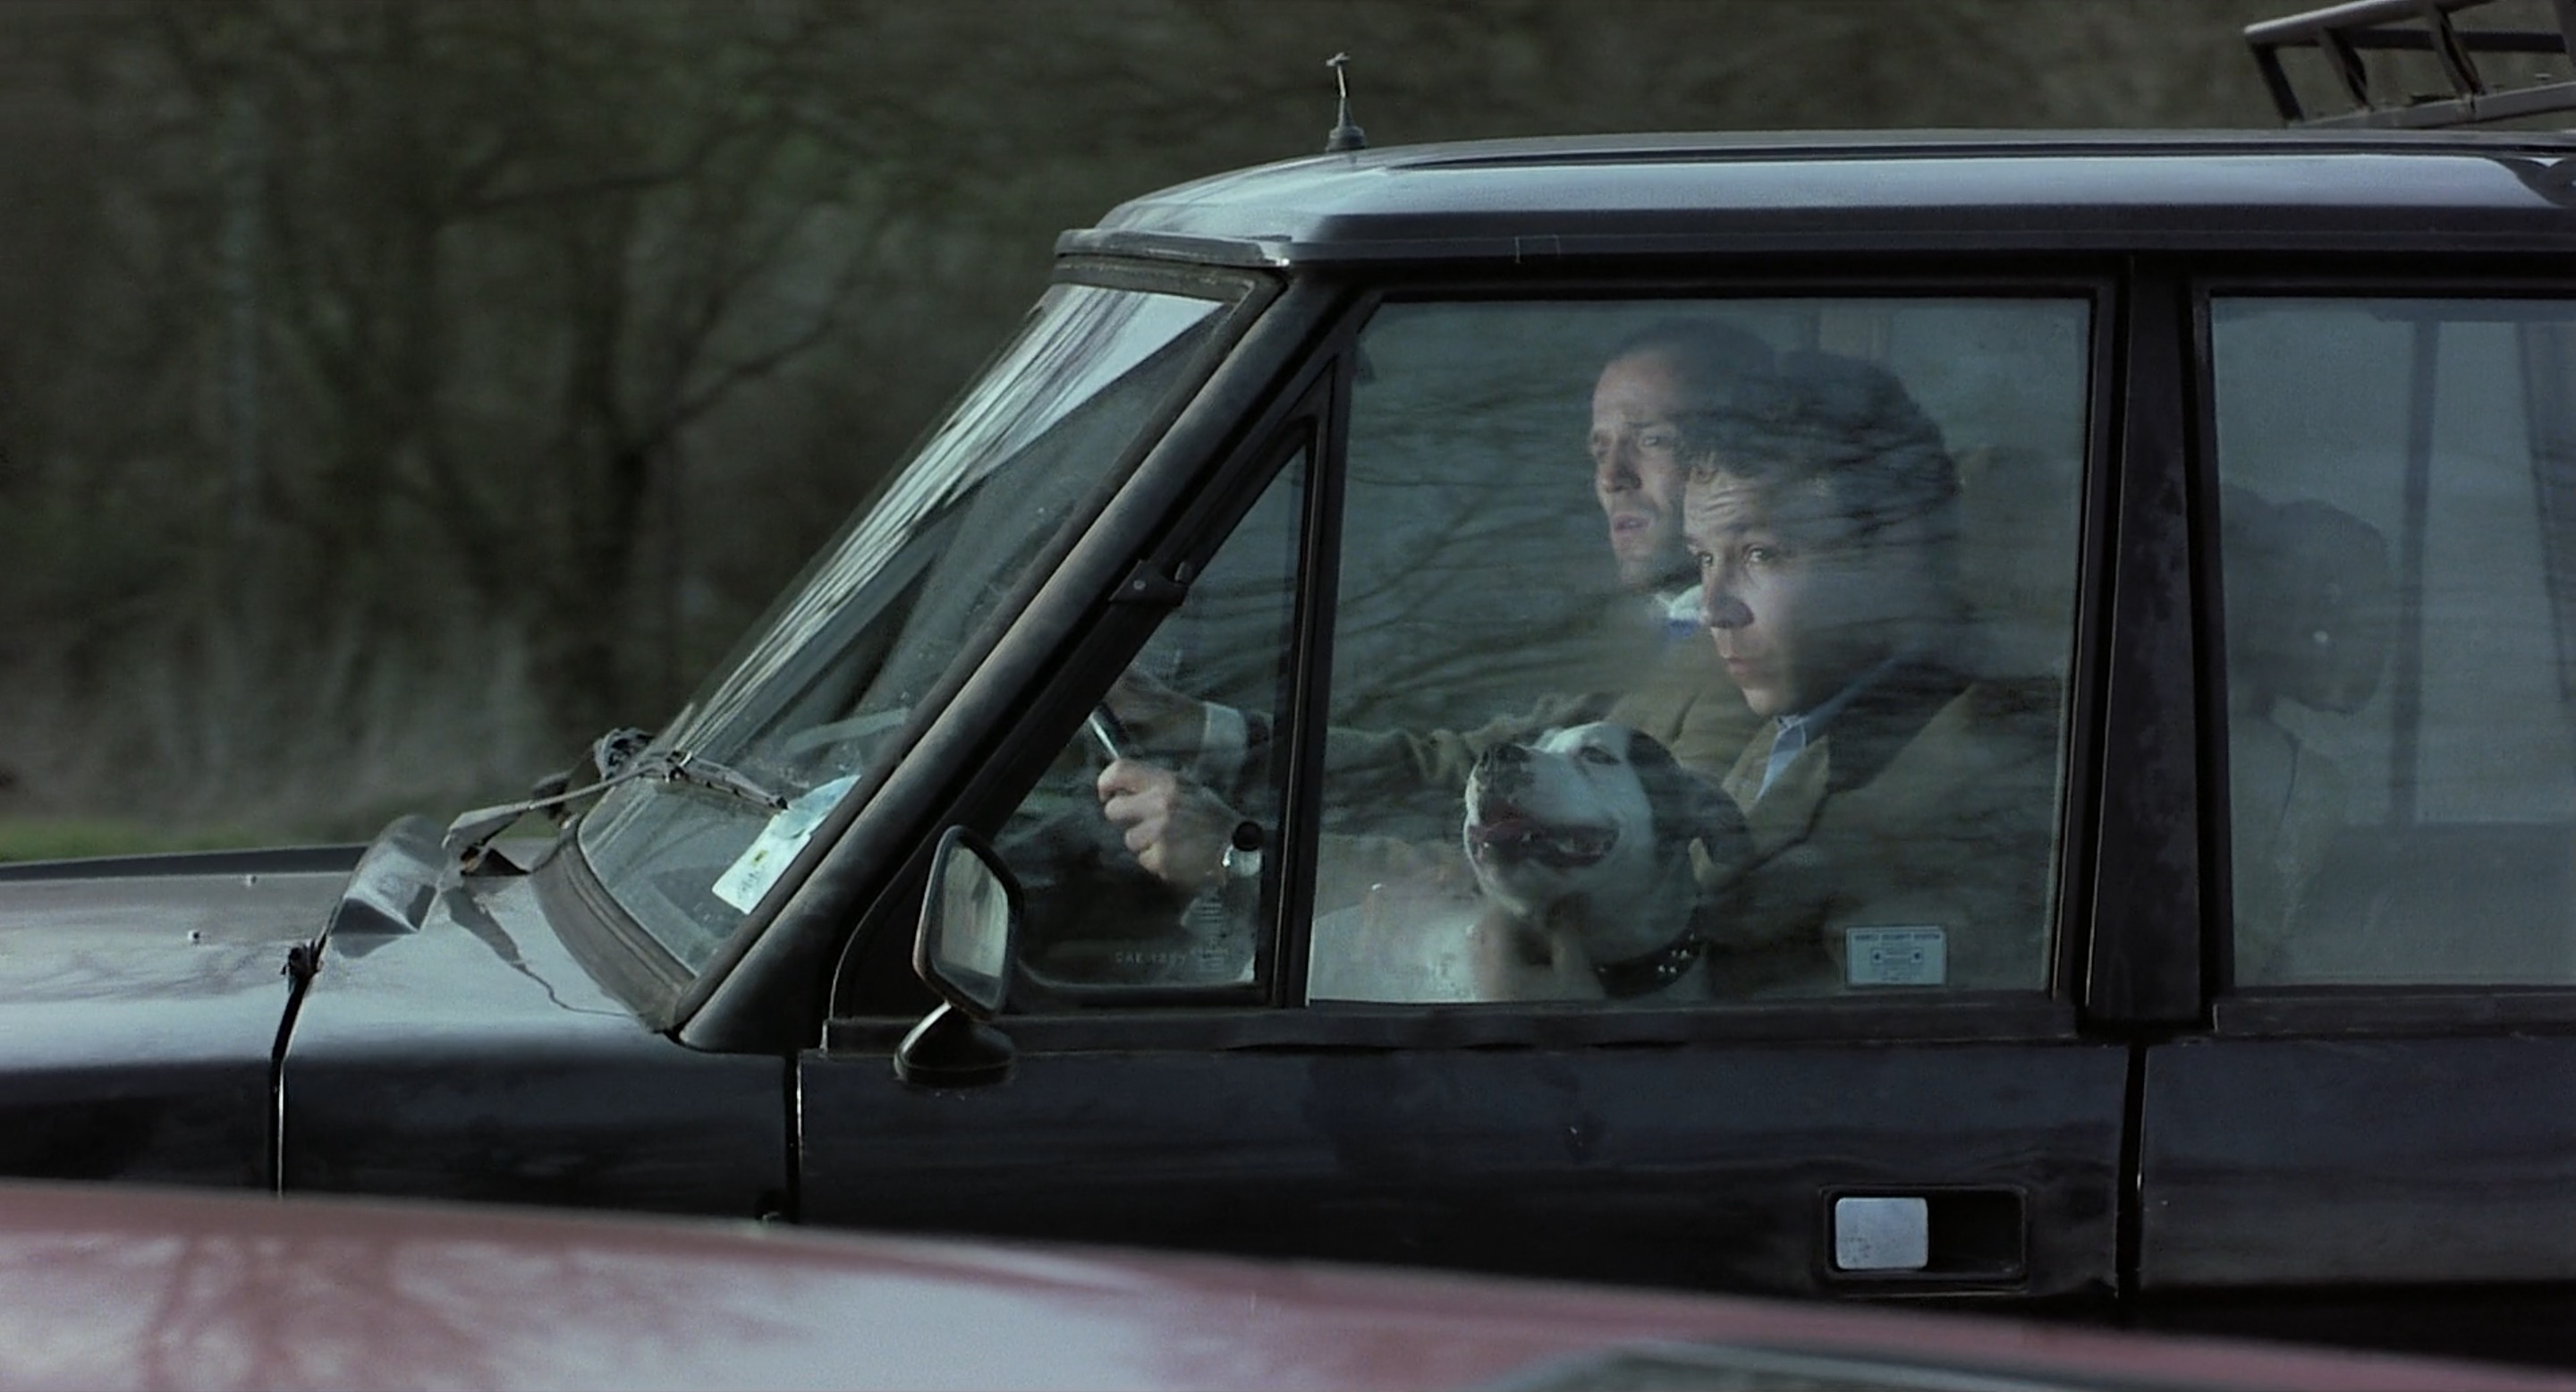 Two men and a dog in a car